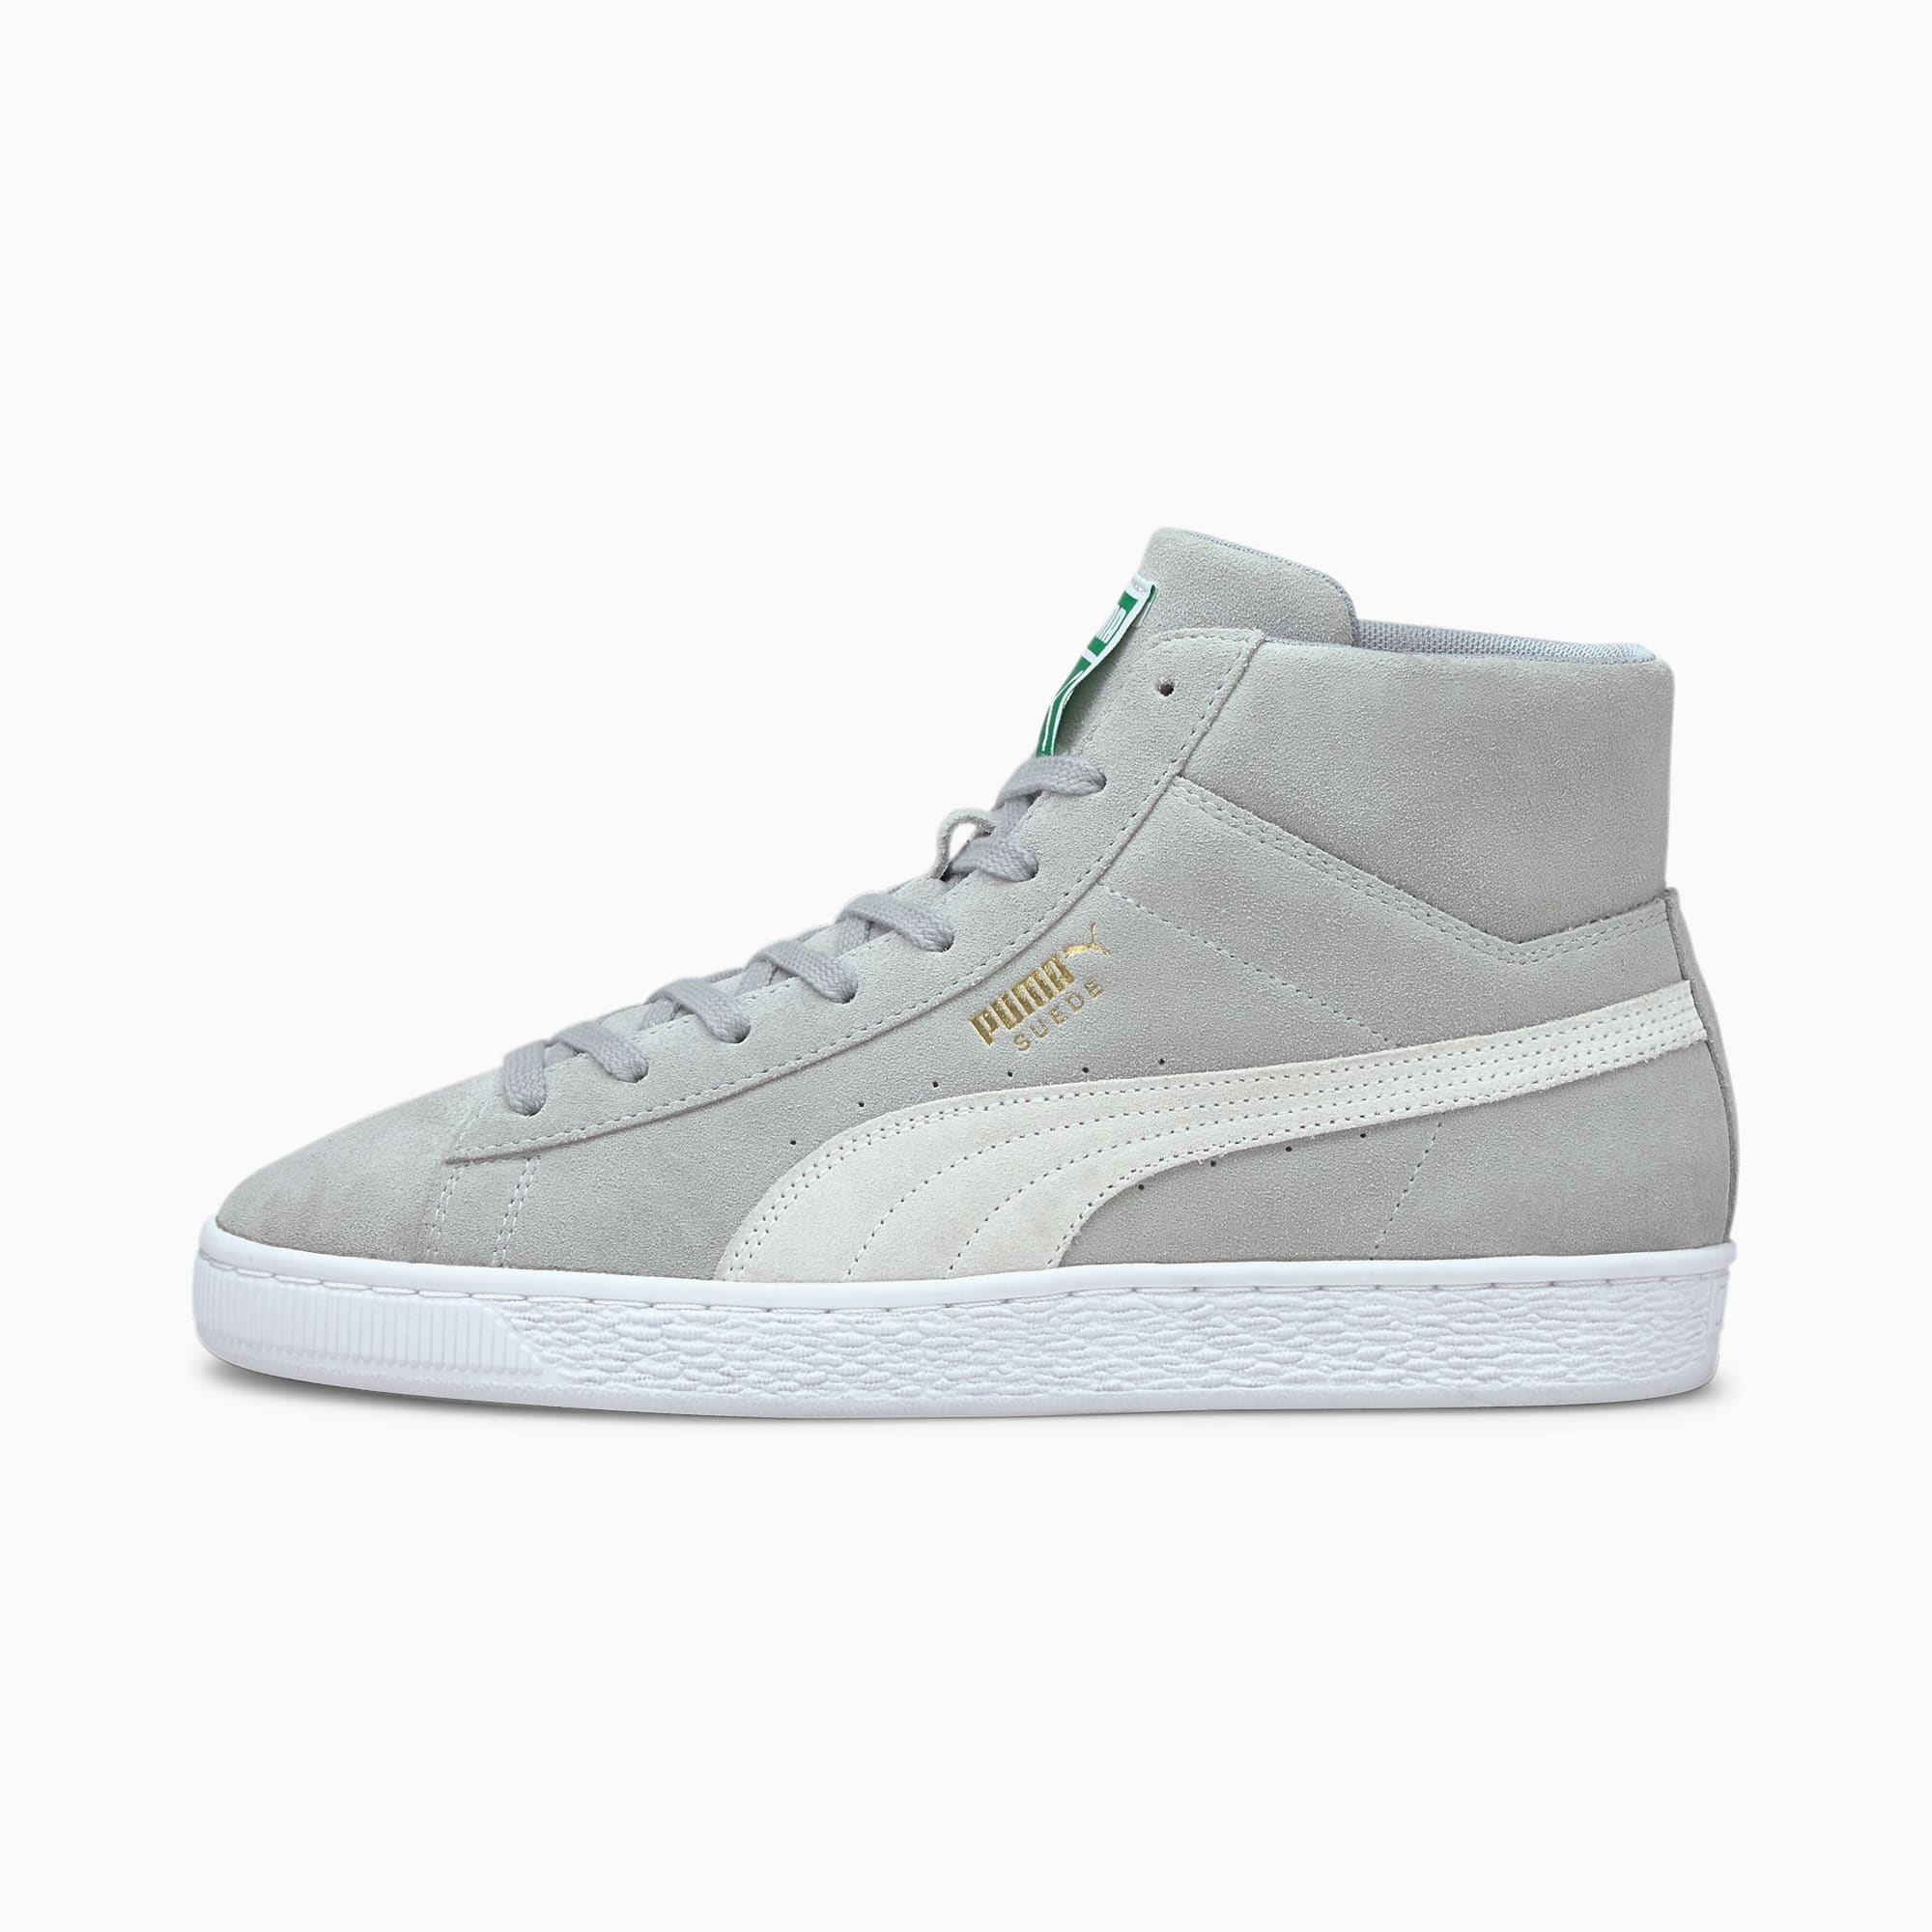 Suede Mid XXI Sneakers | PUMA